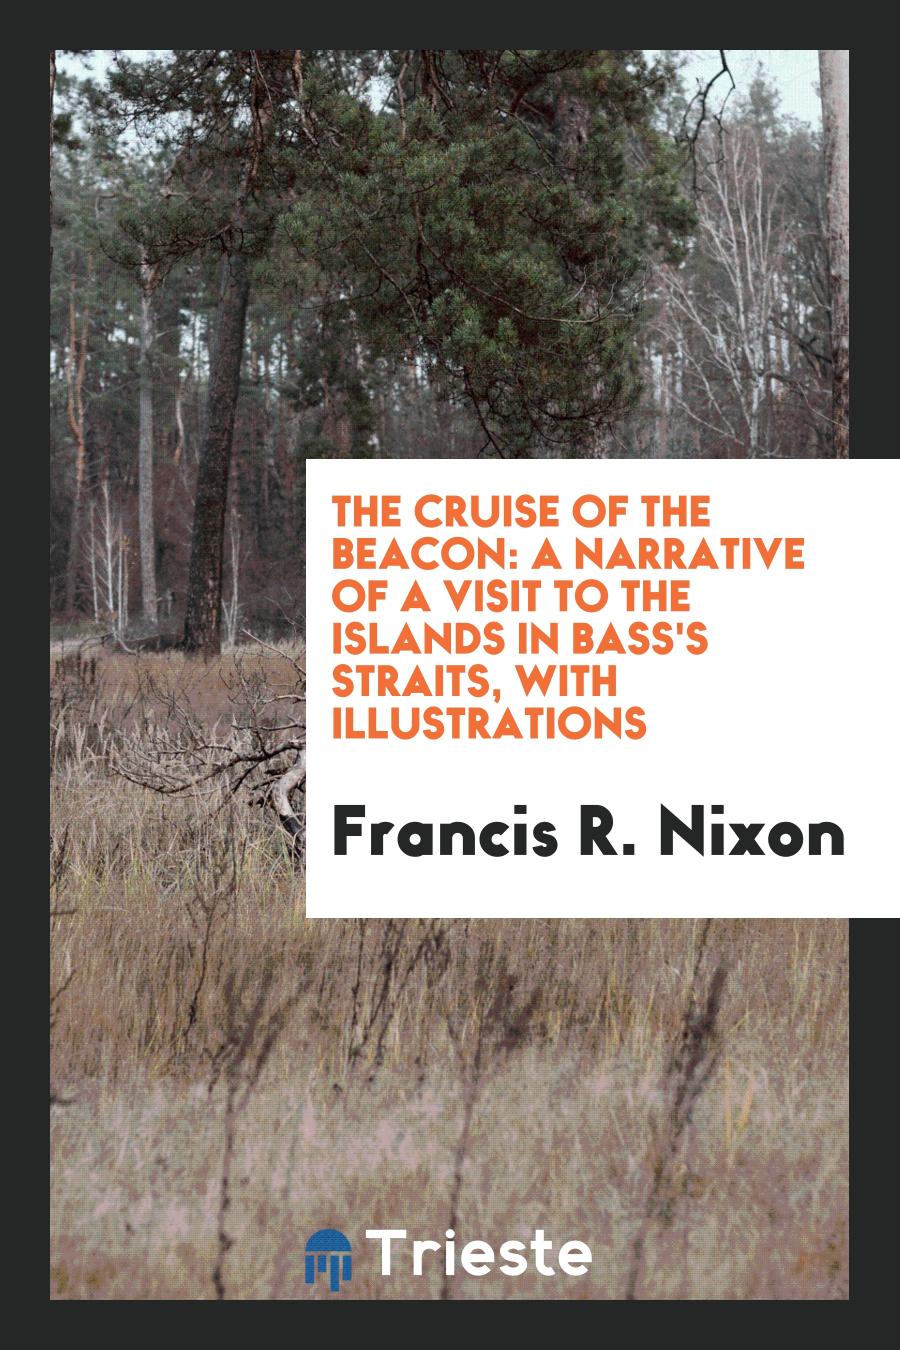 The Cruise of the Beacon: A Narrative of a Visit to the Islands in Bass's Straits, with Illustrations